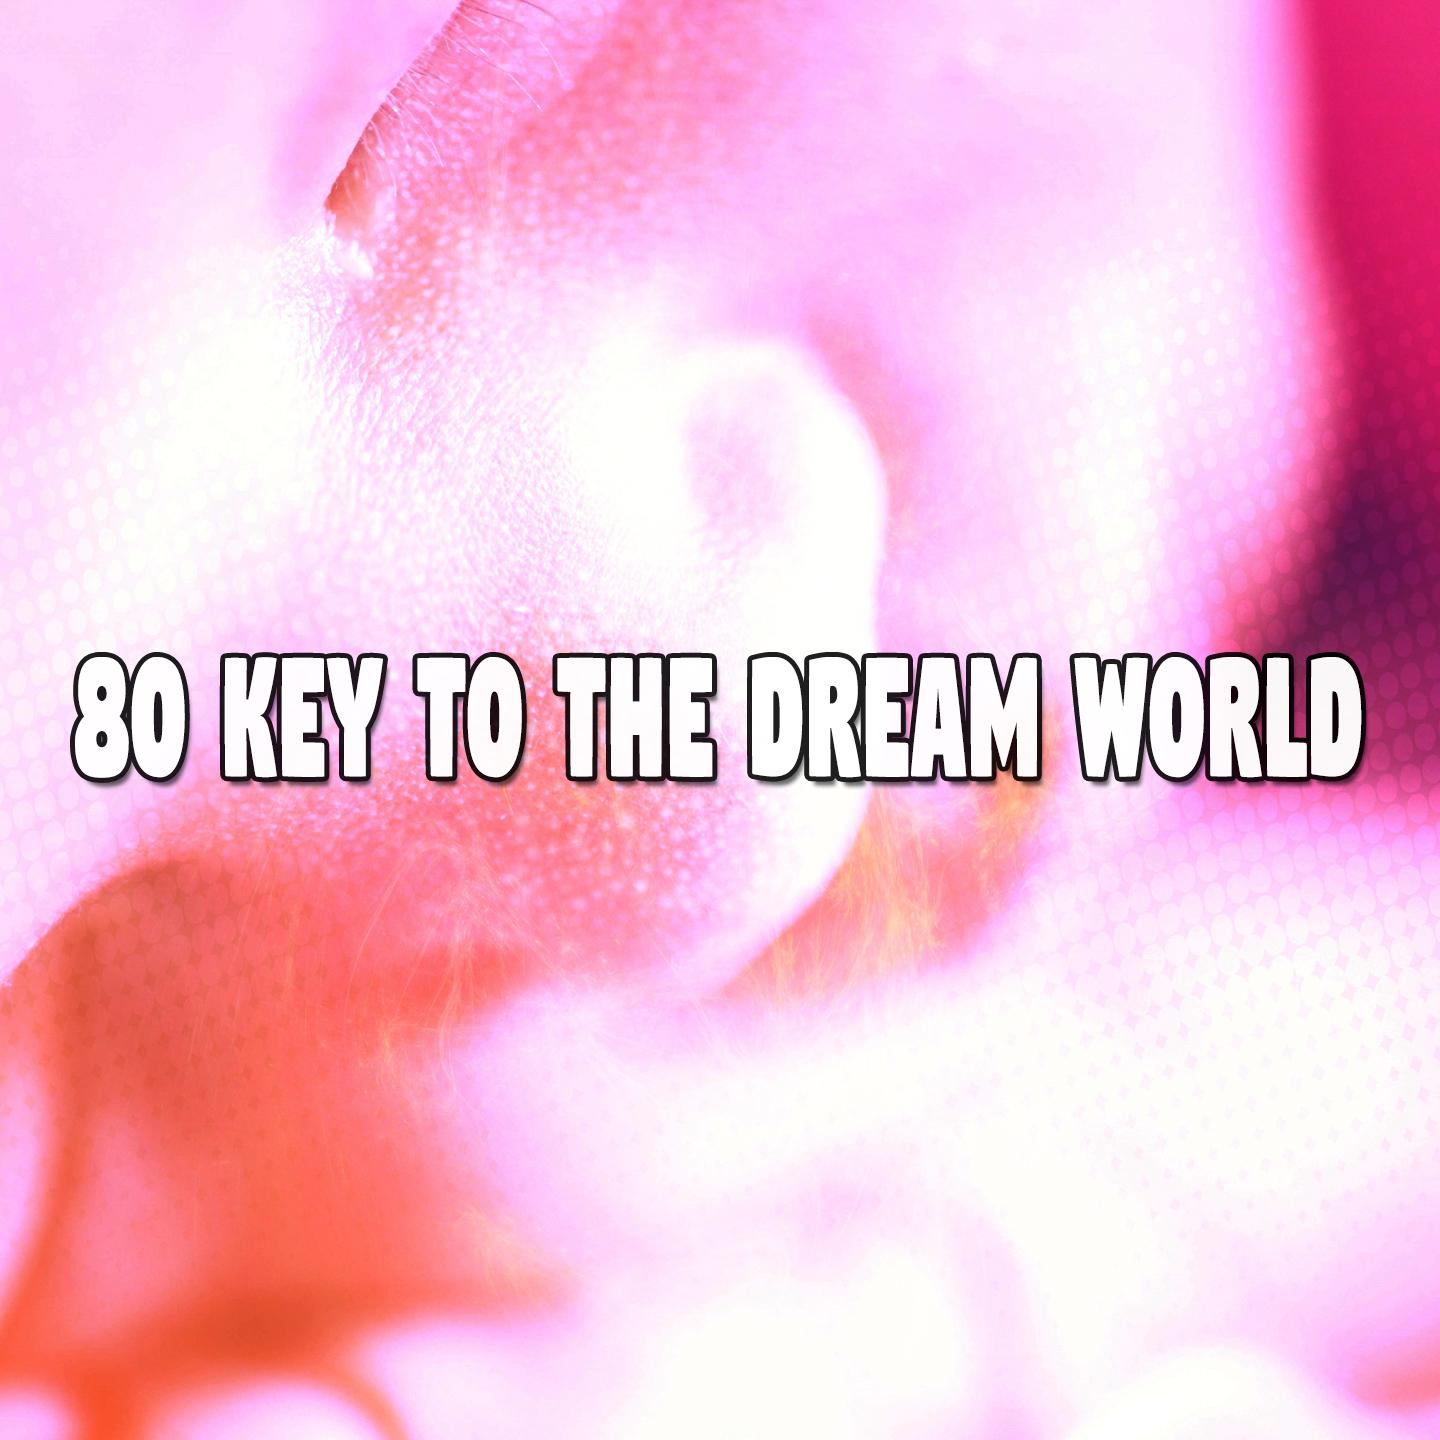 80 Key to the Dream World